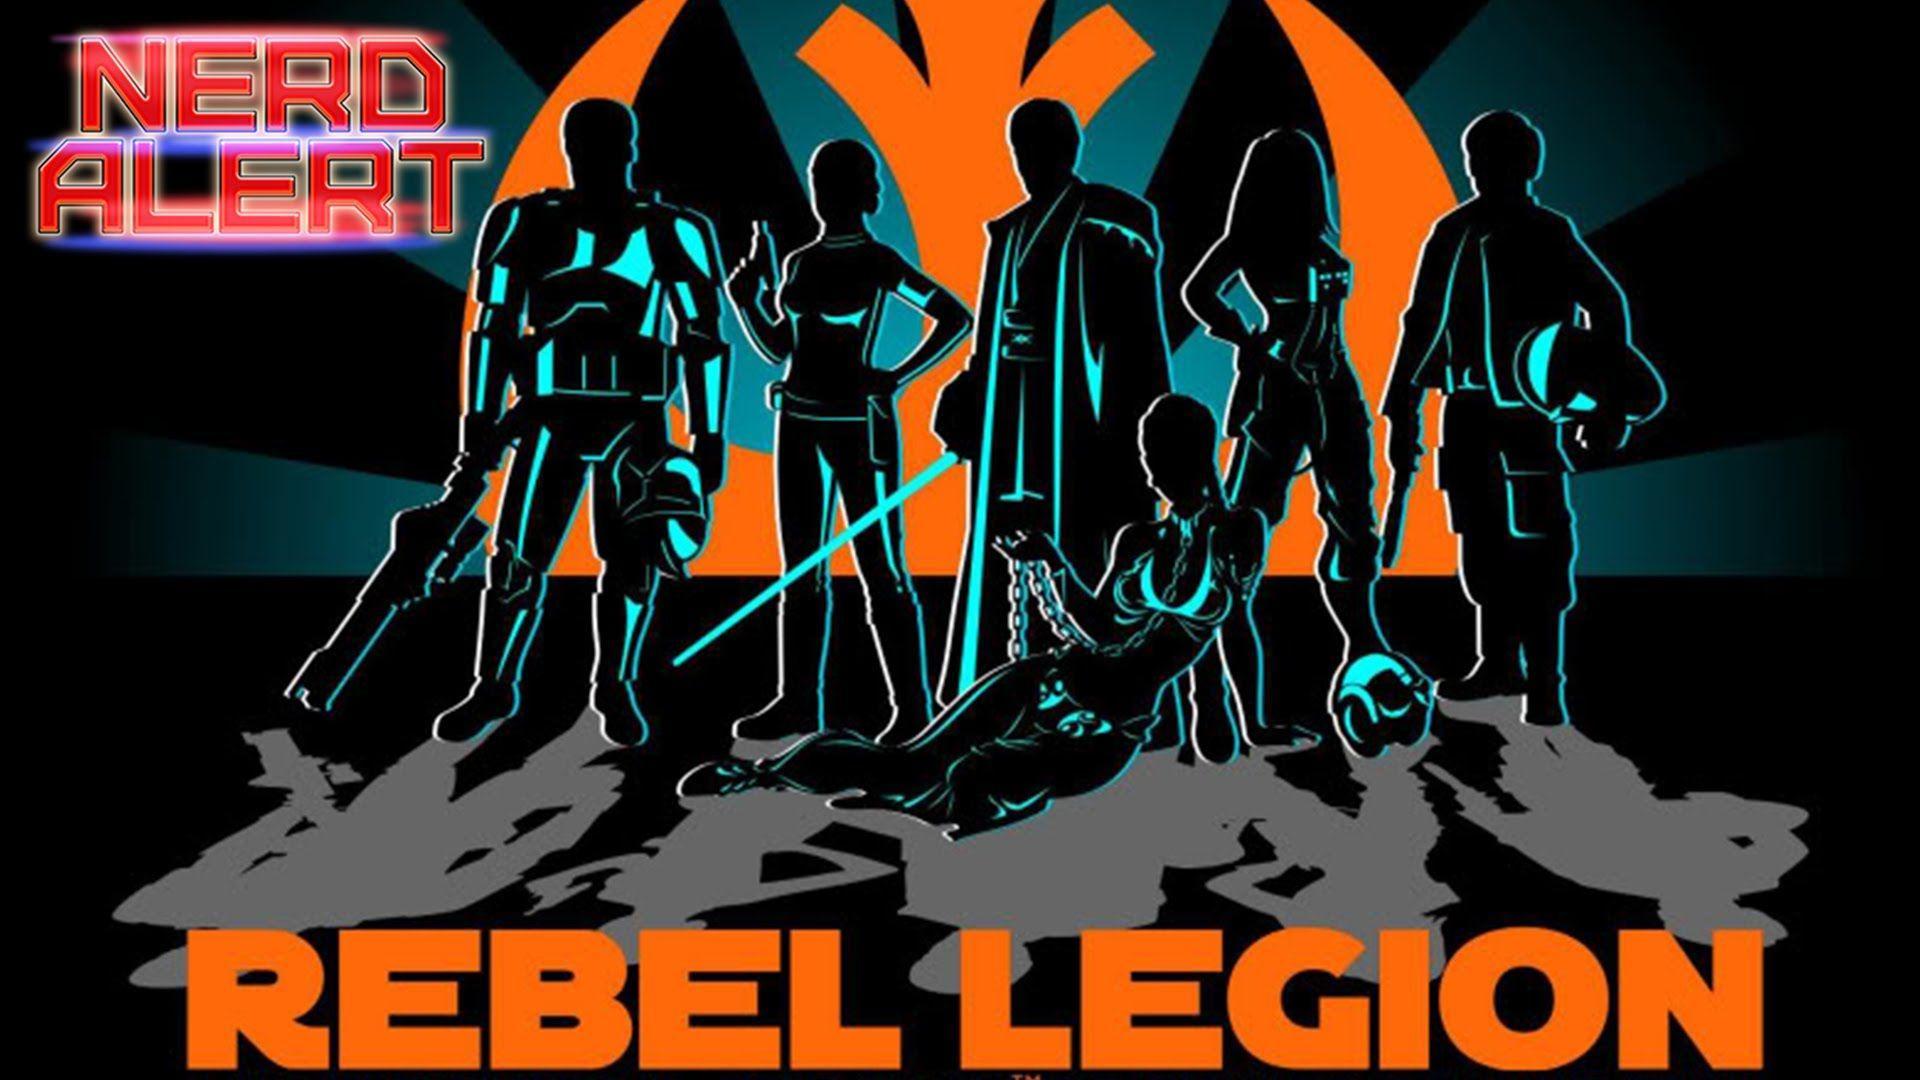 Rebels with a Cause Star Wars Rebel Legion!